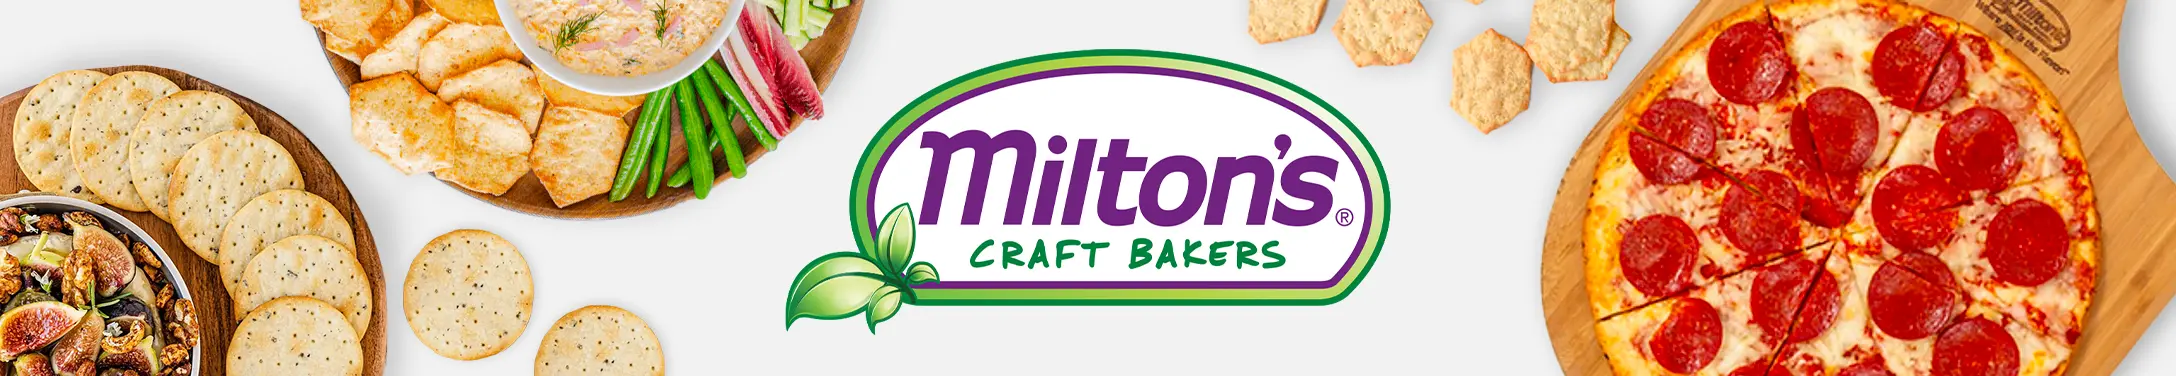 Miltons logo surrounded by pizza and cracker products